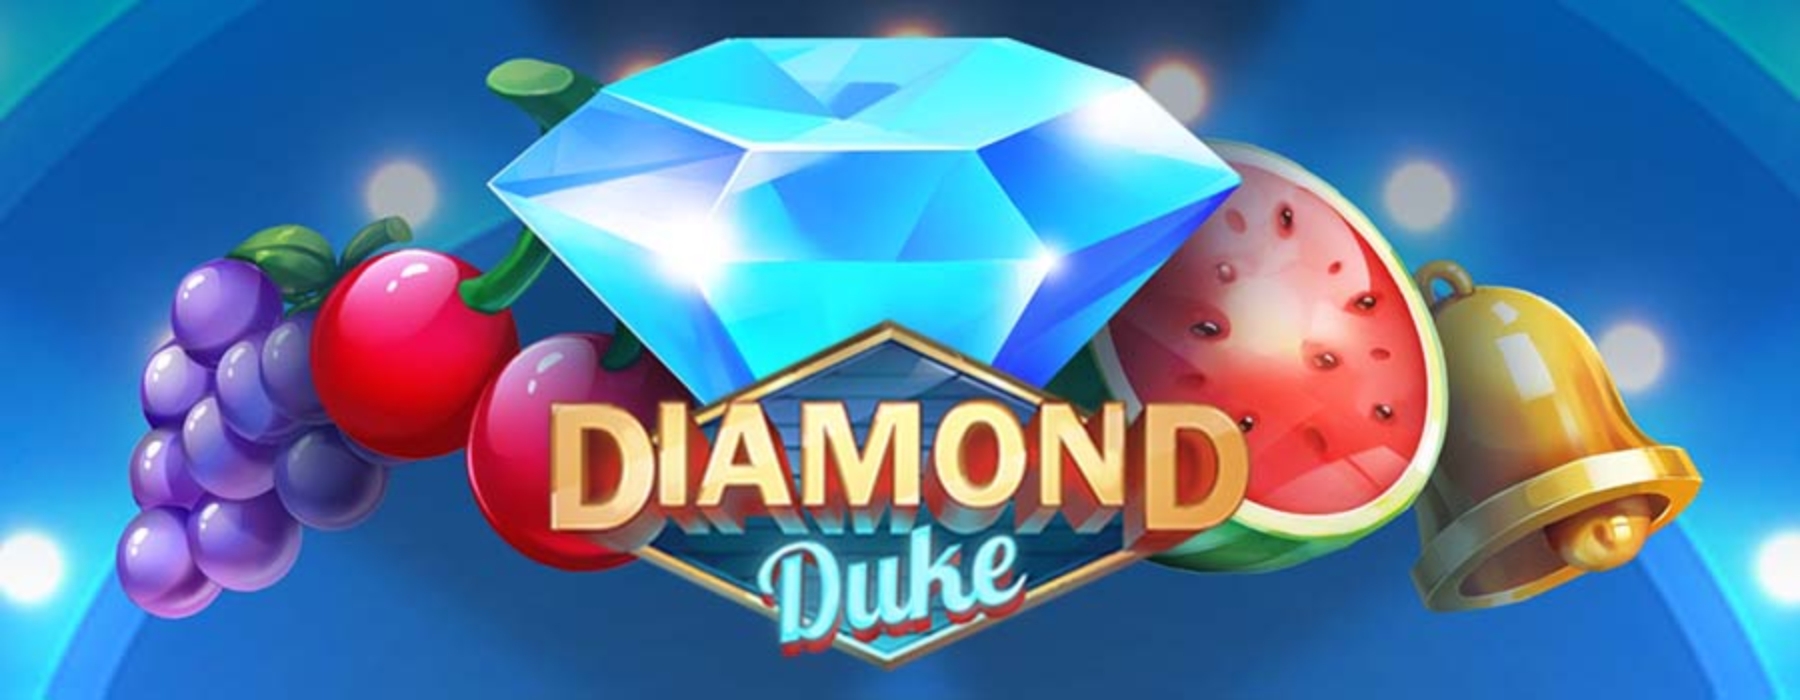 The Diamond Duke Online Slot Demo Game by Quickspin